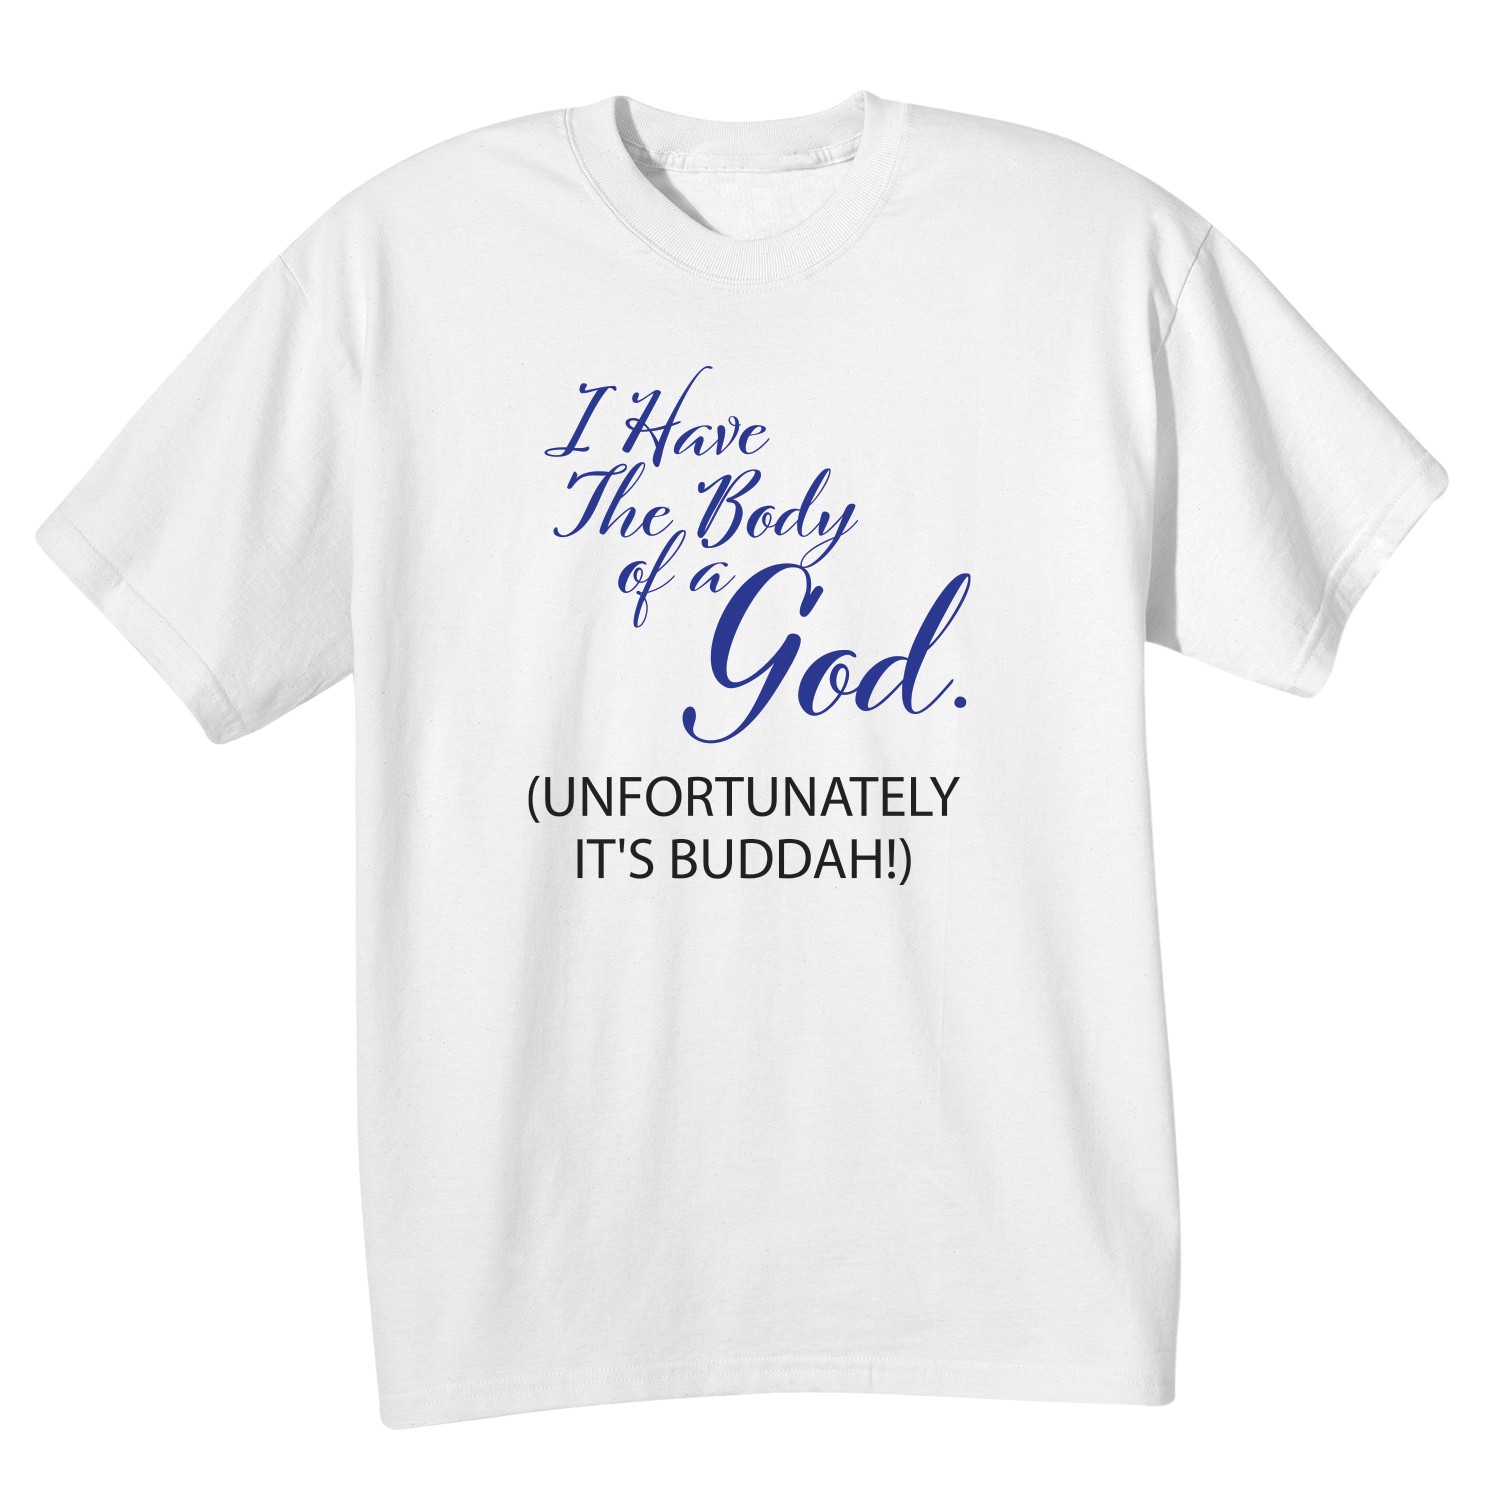 I Have The Body Of A God. (Unfortunately It's Buddah!) T-Shirt or ...